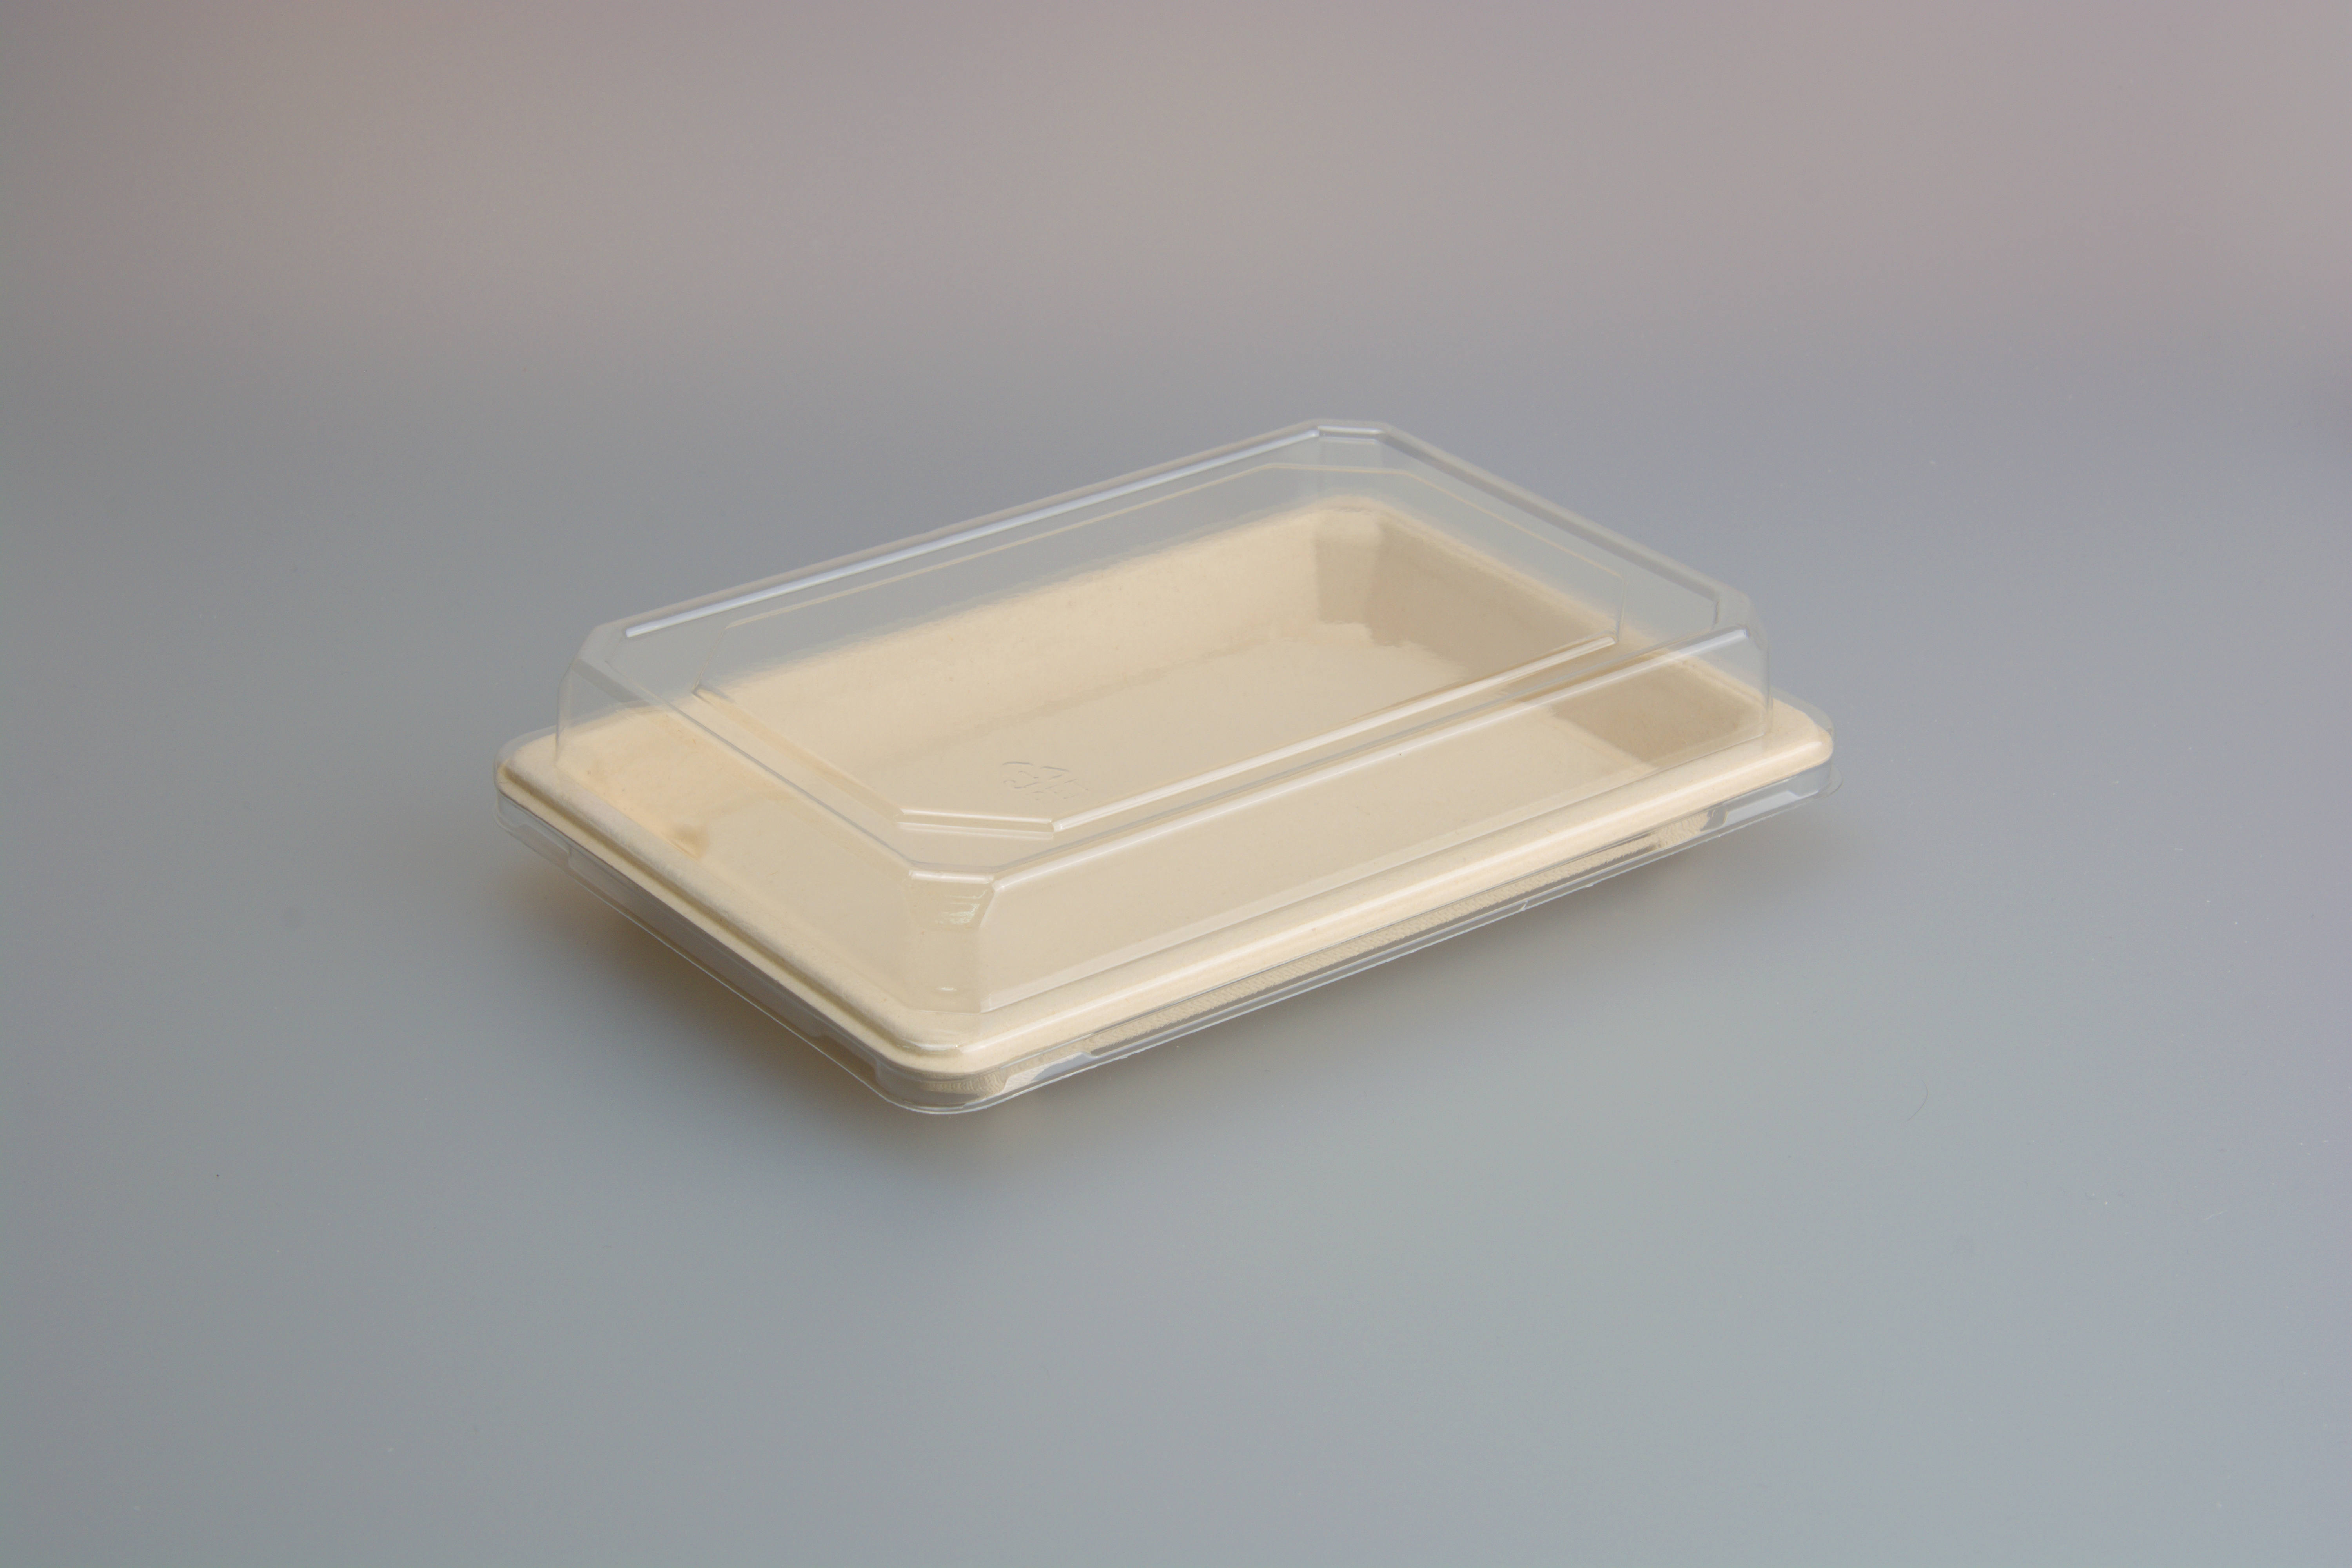 Best-Selling Hinged Box - 7.3*5.0 INCH Sushi Trays, Disposable Sushi Containers With Lids – Short, Take Out Containers For Appetizers, Entrees, or Desserts, Black Plastic To Go Containers &#...